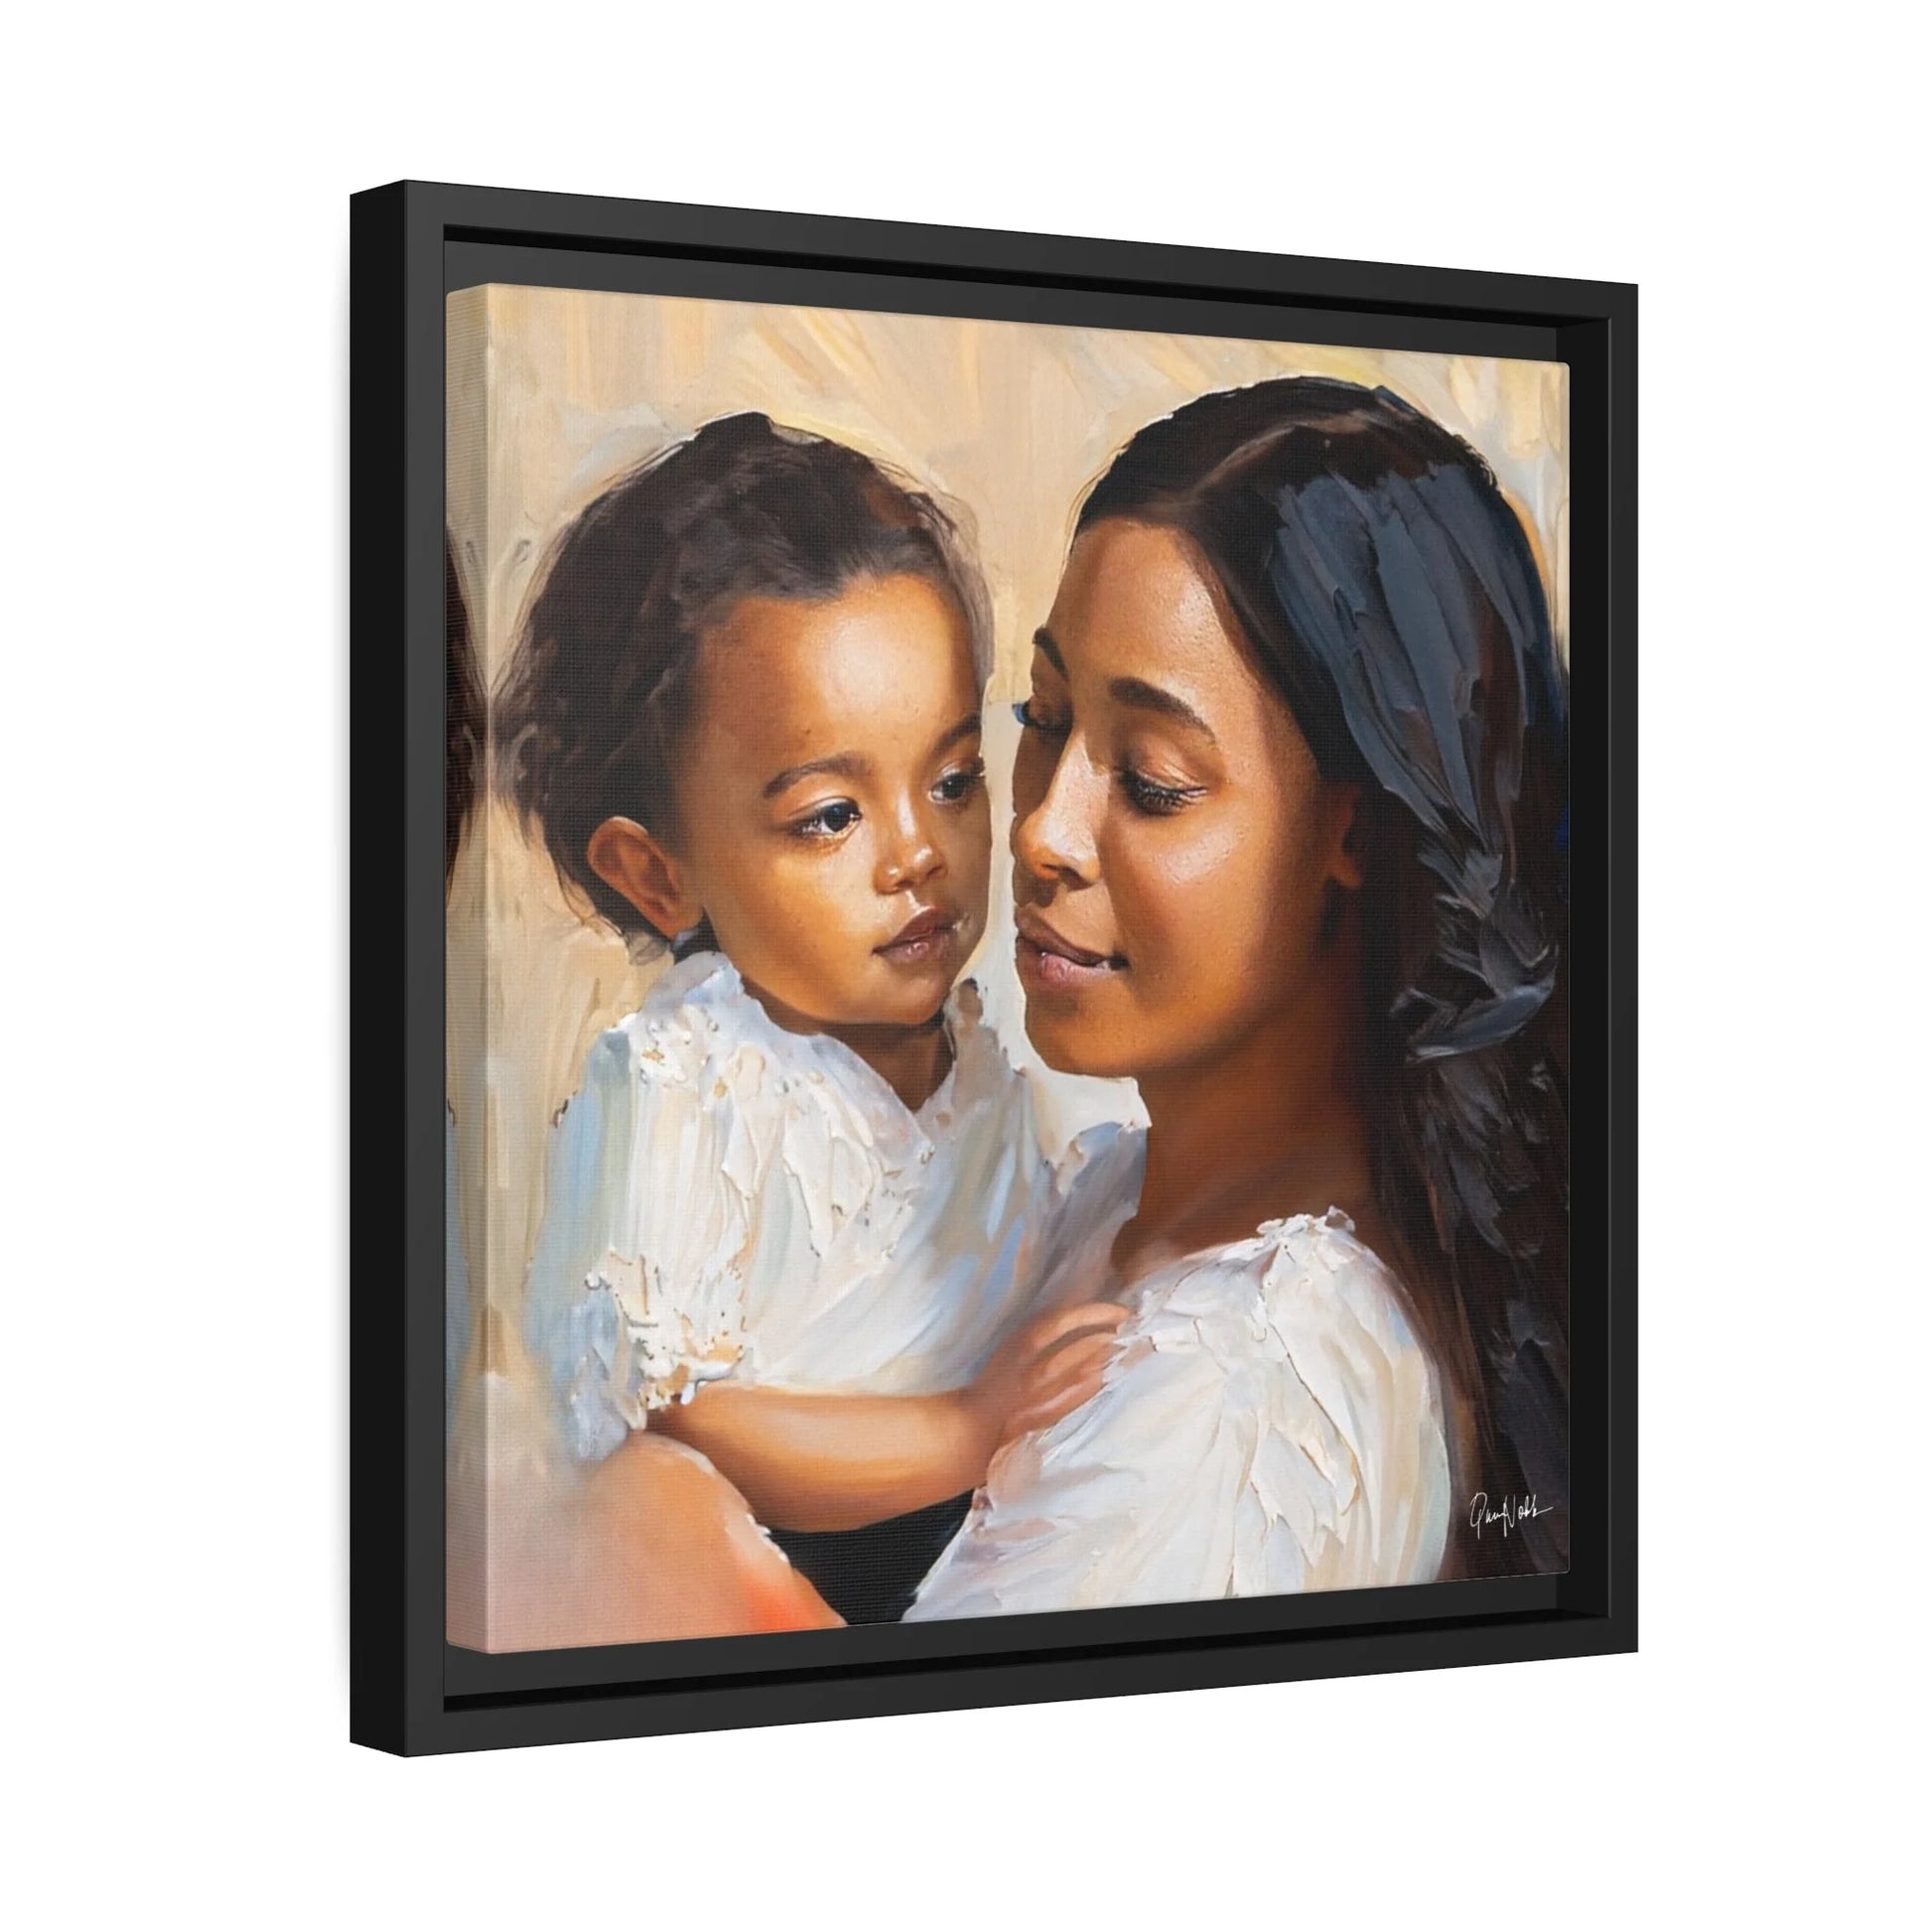 "Exquisite Mother and Child Portrait Canvas Wall Art with Elegant Frame - Queennoble"